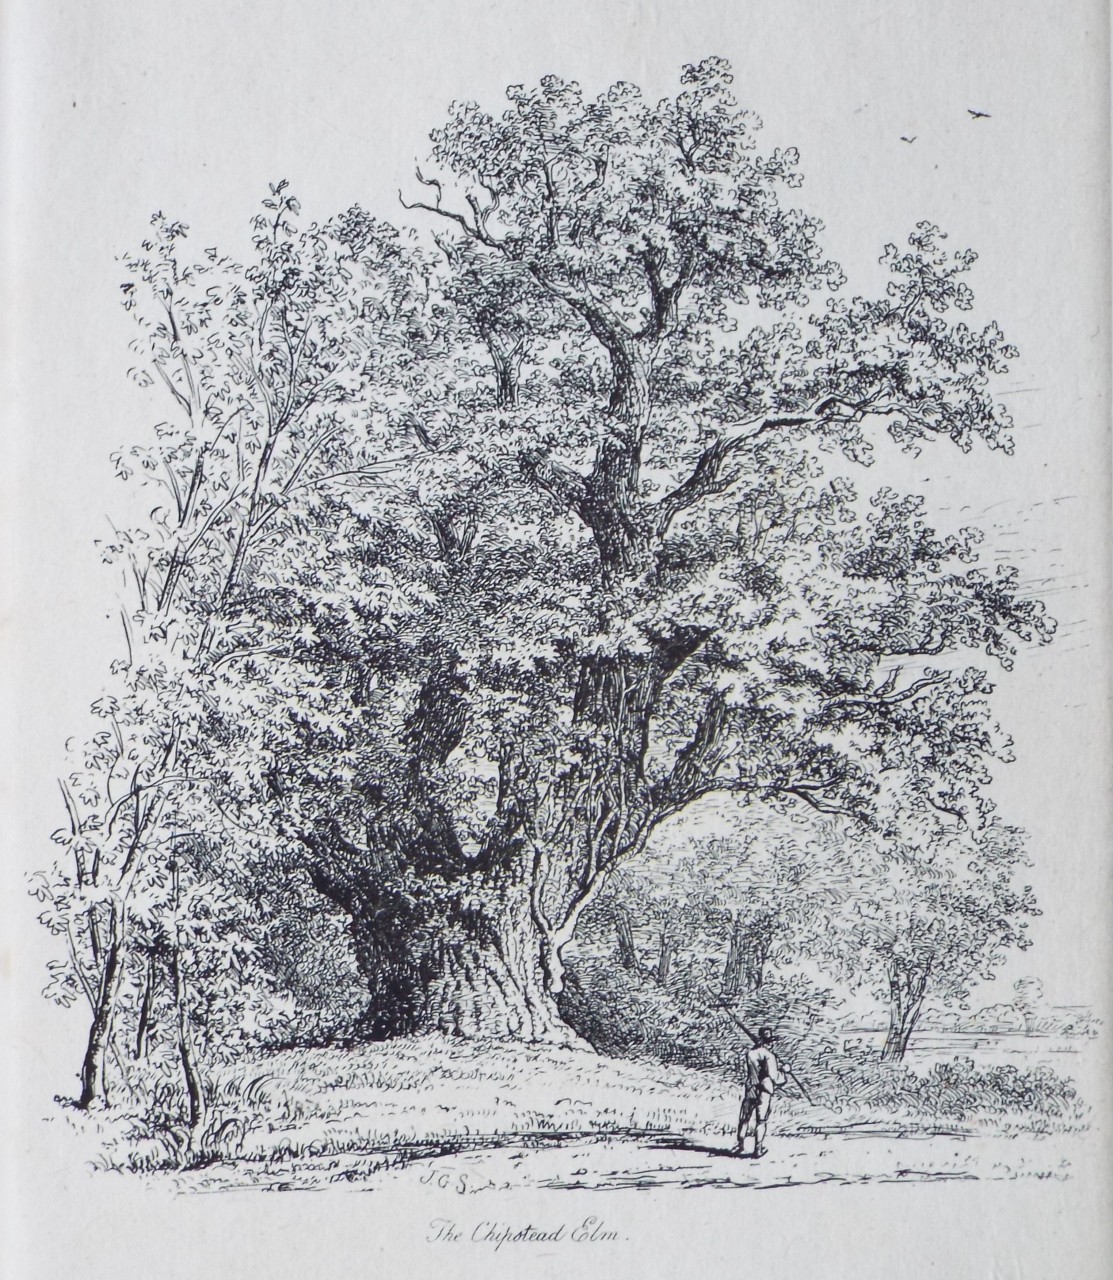 Etching - The Chipstead Elm. - Strutt